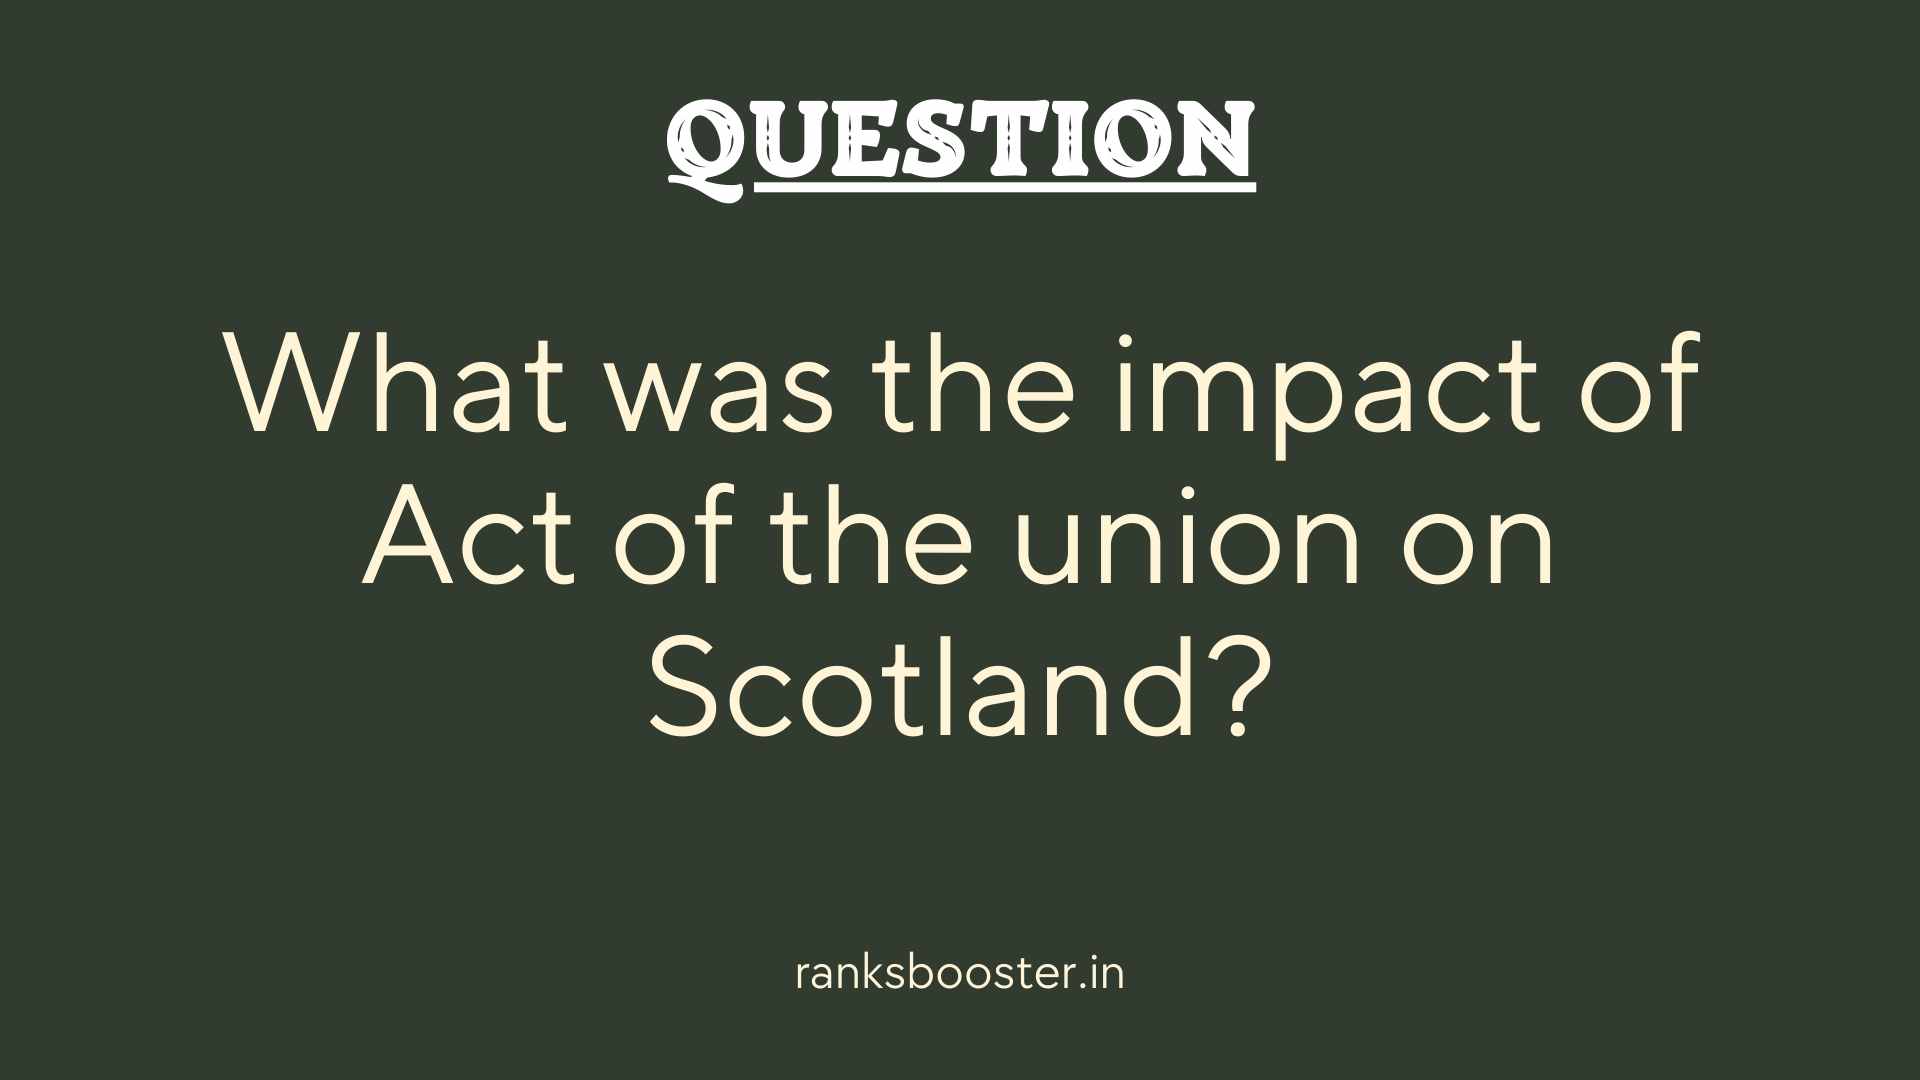 Question: What was the impact of Act of the union on Scotland?